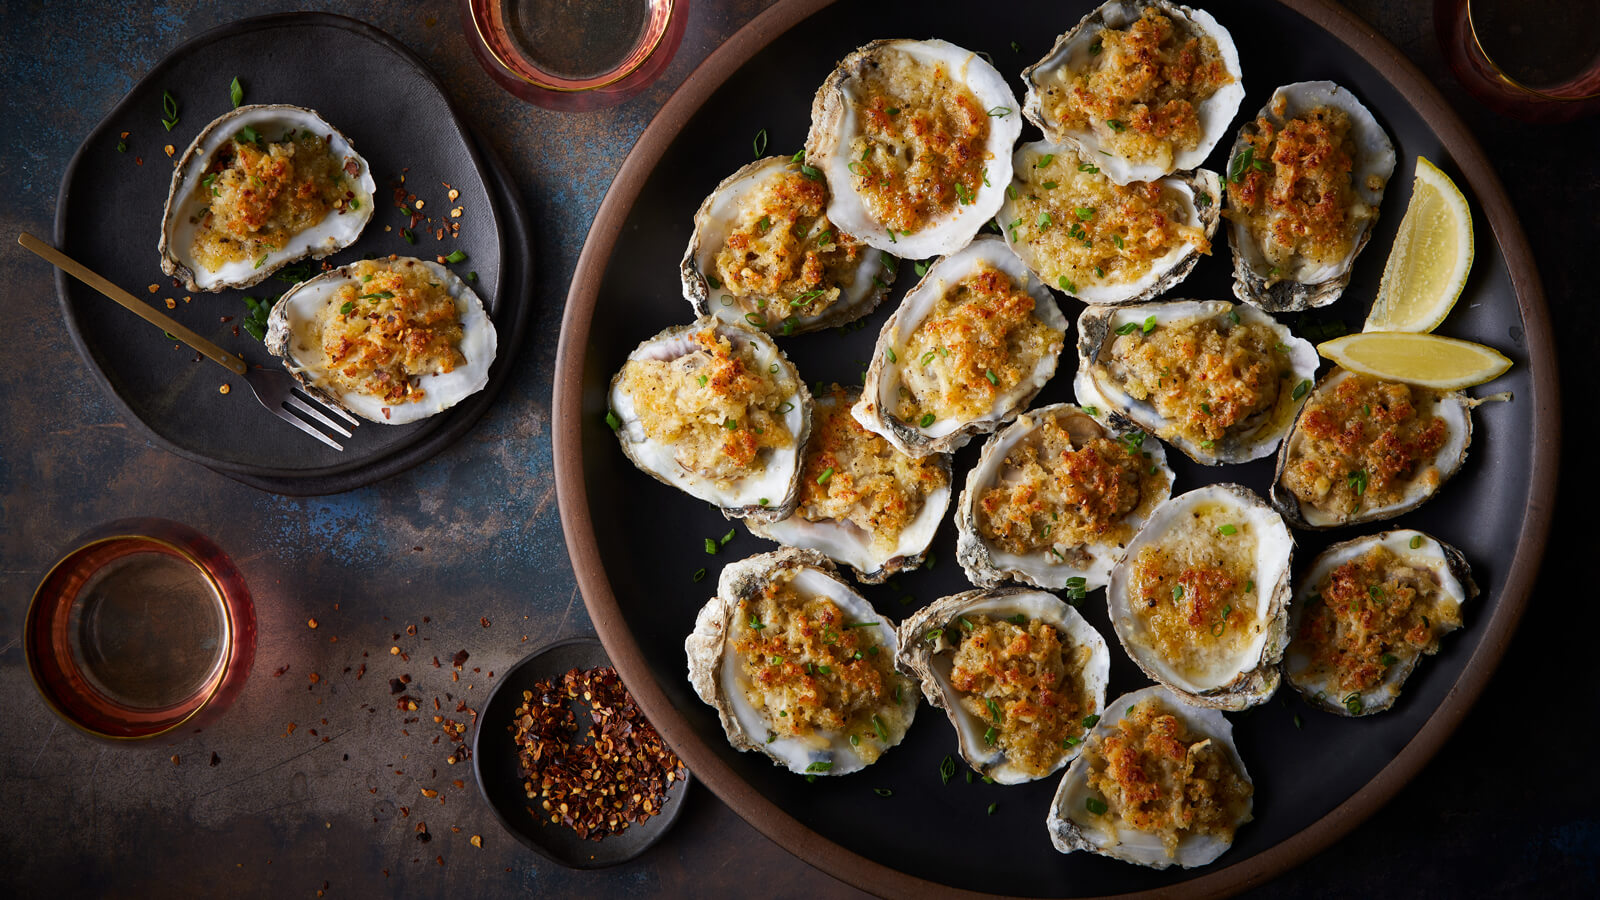 Grilled Oysters from Great Britain